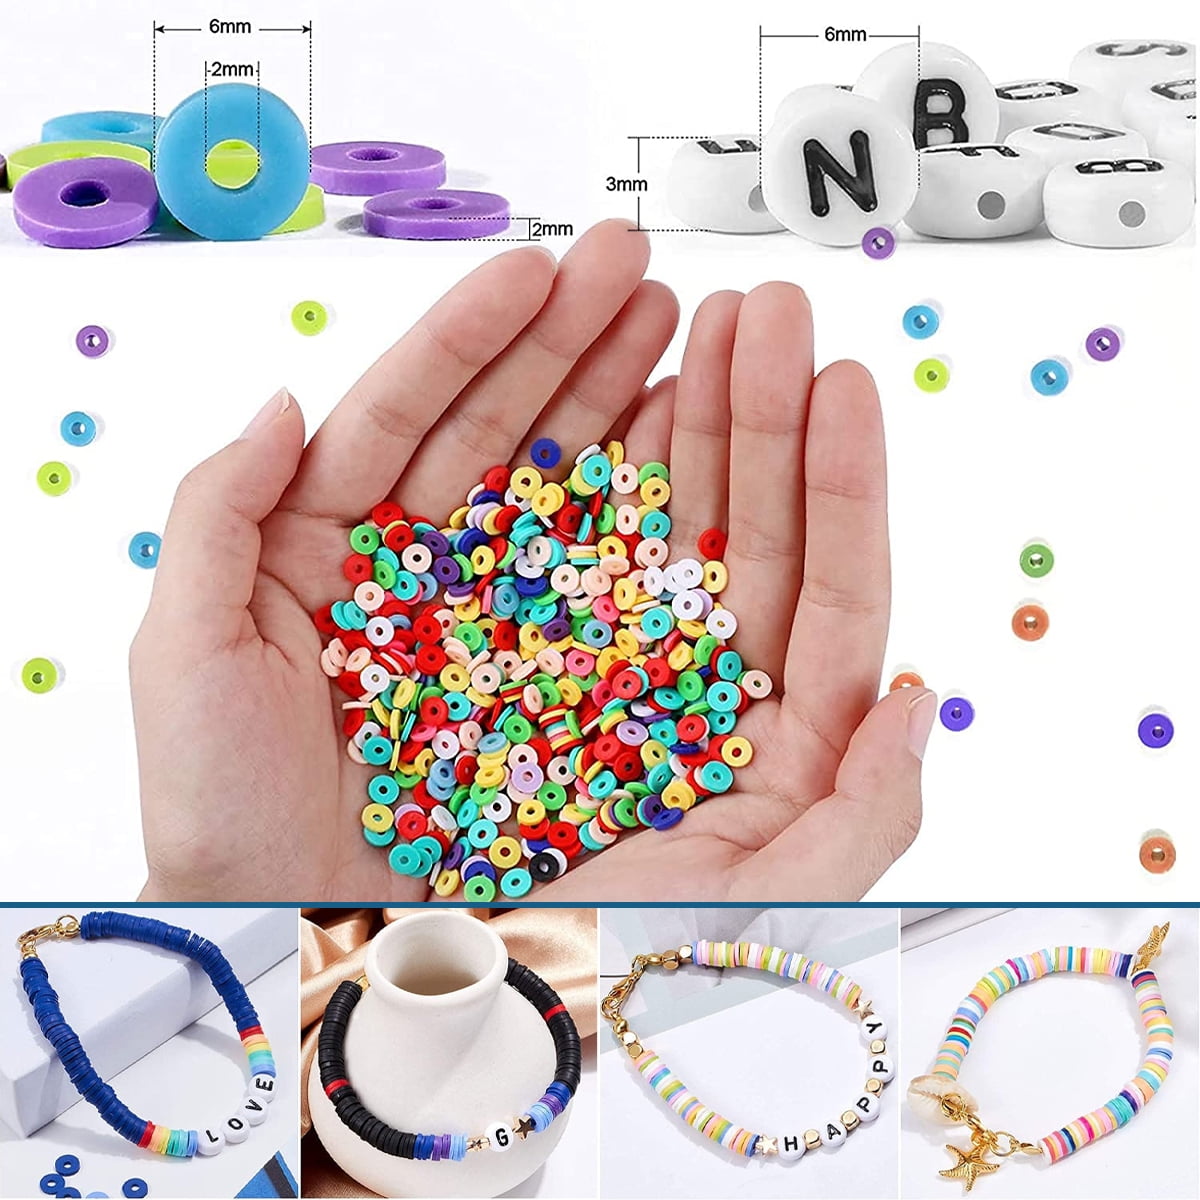 Amazon.com: UNIZHS Bead Bracelet Making Kit, Clay Bead Friendship Bracelets  Kit with Fruit Flower Beads Pony Beads Letter Beads Charm Beads and Elastic  String for Bracelet and Jewelry Making